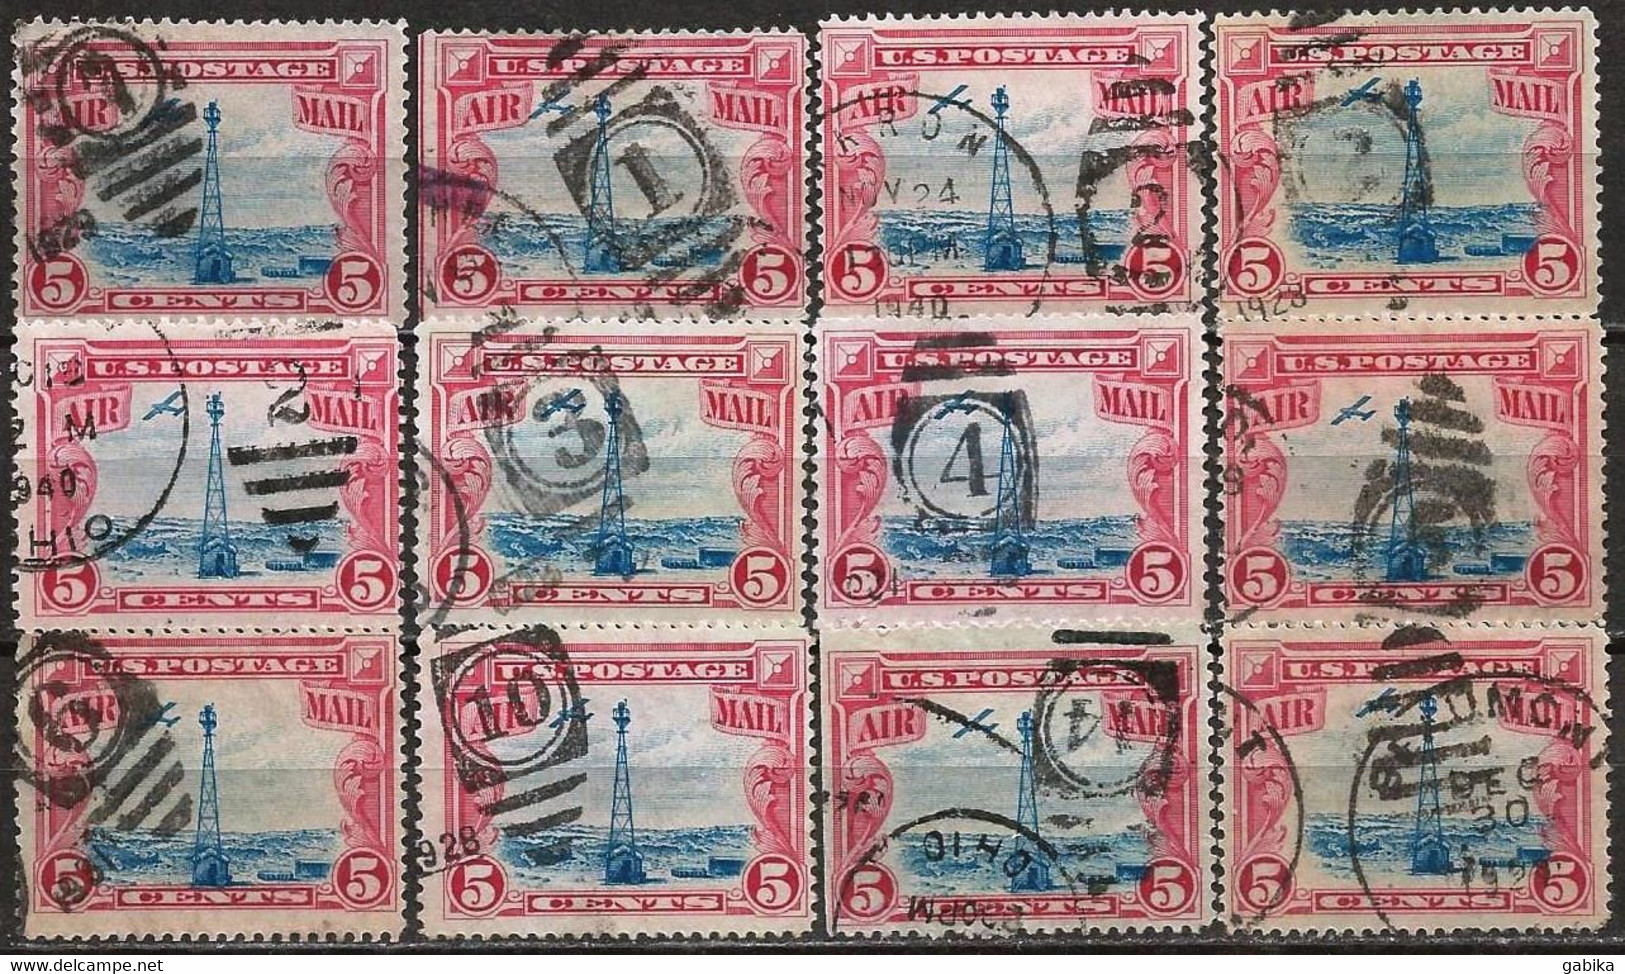 USA 1928, Scott C11, Used Air Mail, Duplex Oval Different Canceling, Beacon - 1a. 1918-1940 Used